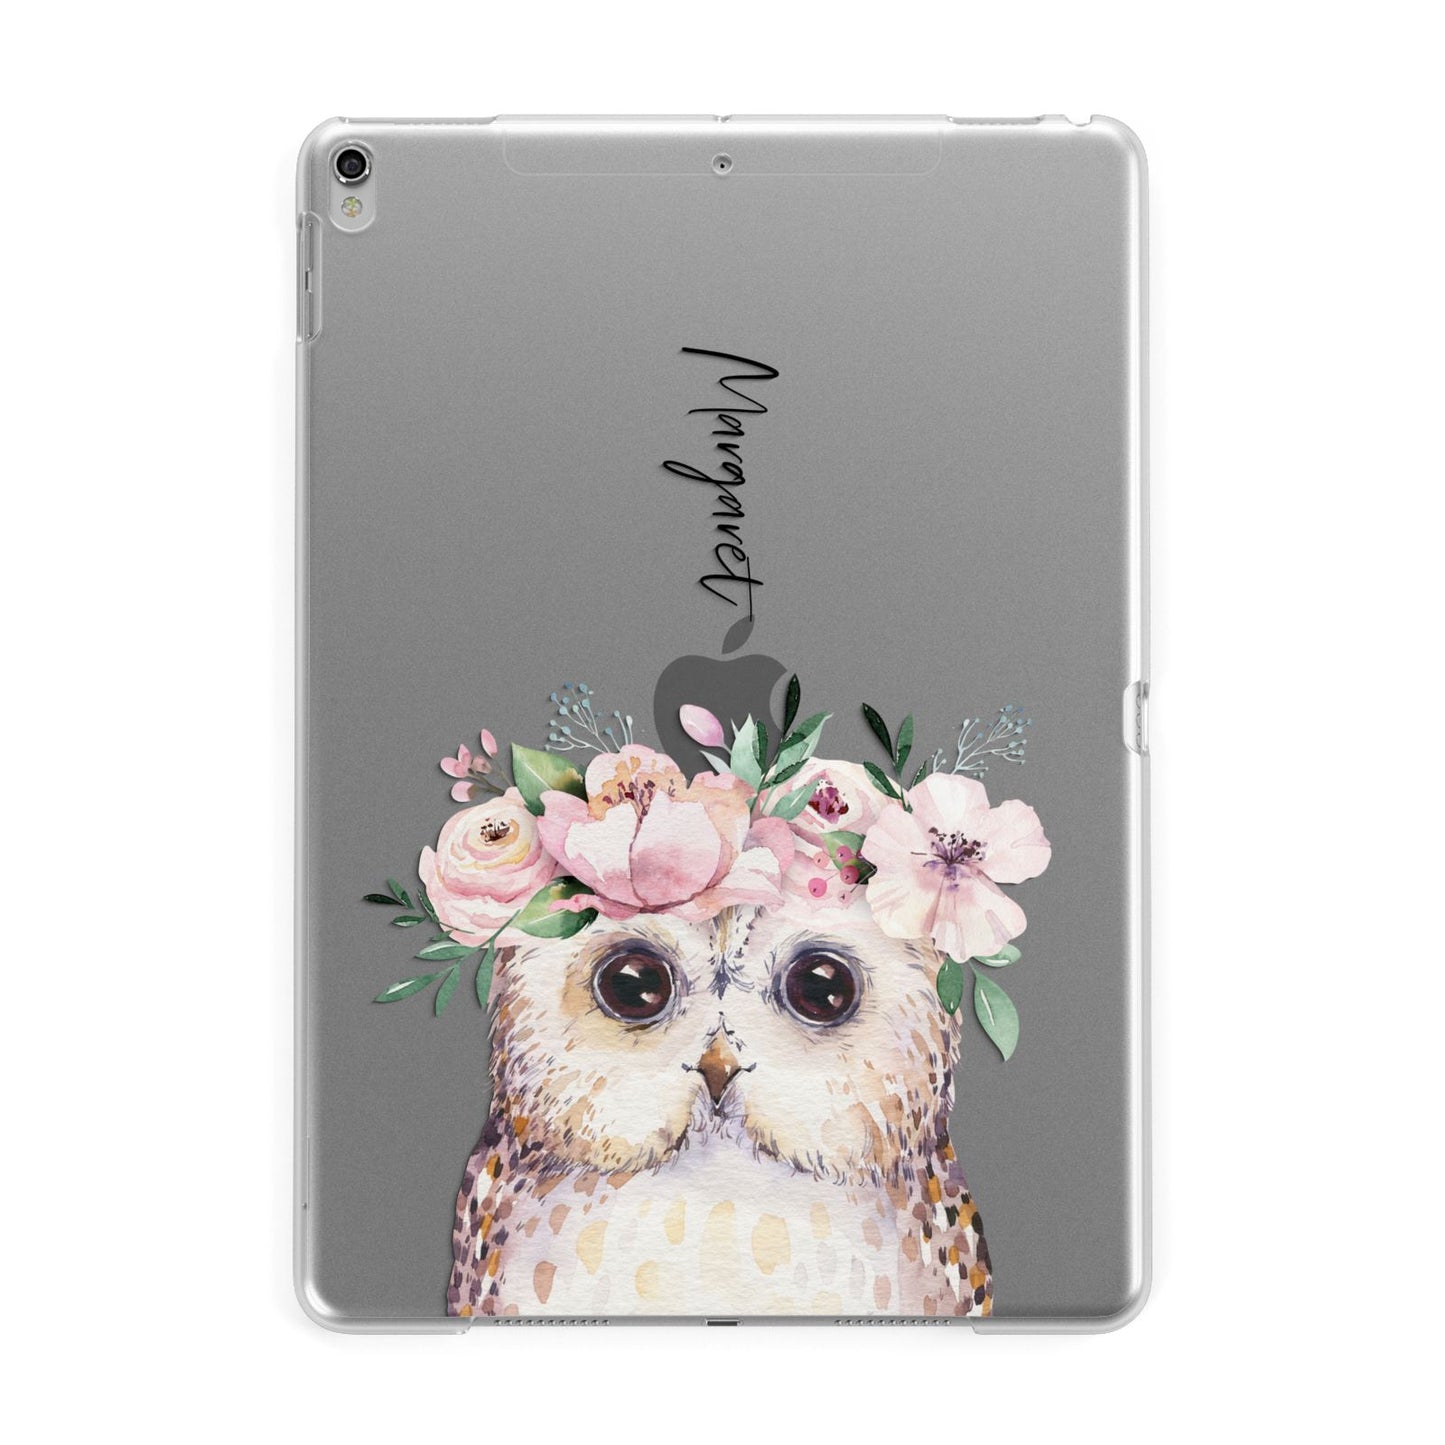 Personalised Name Owl Apple iPad Silver Case